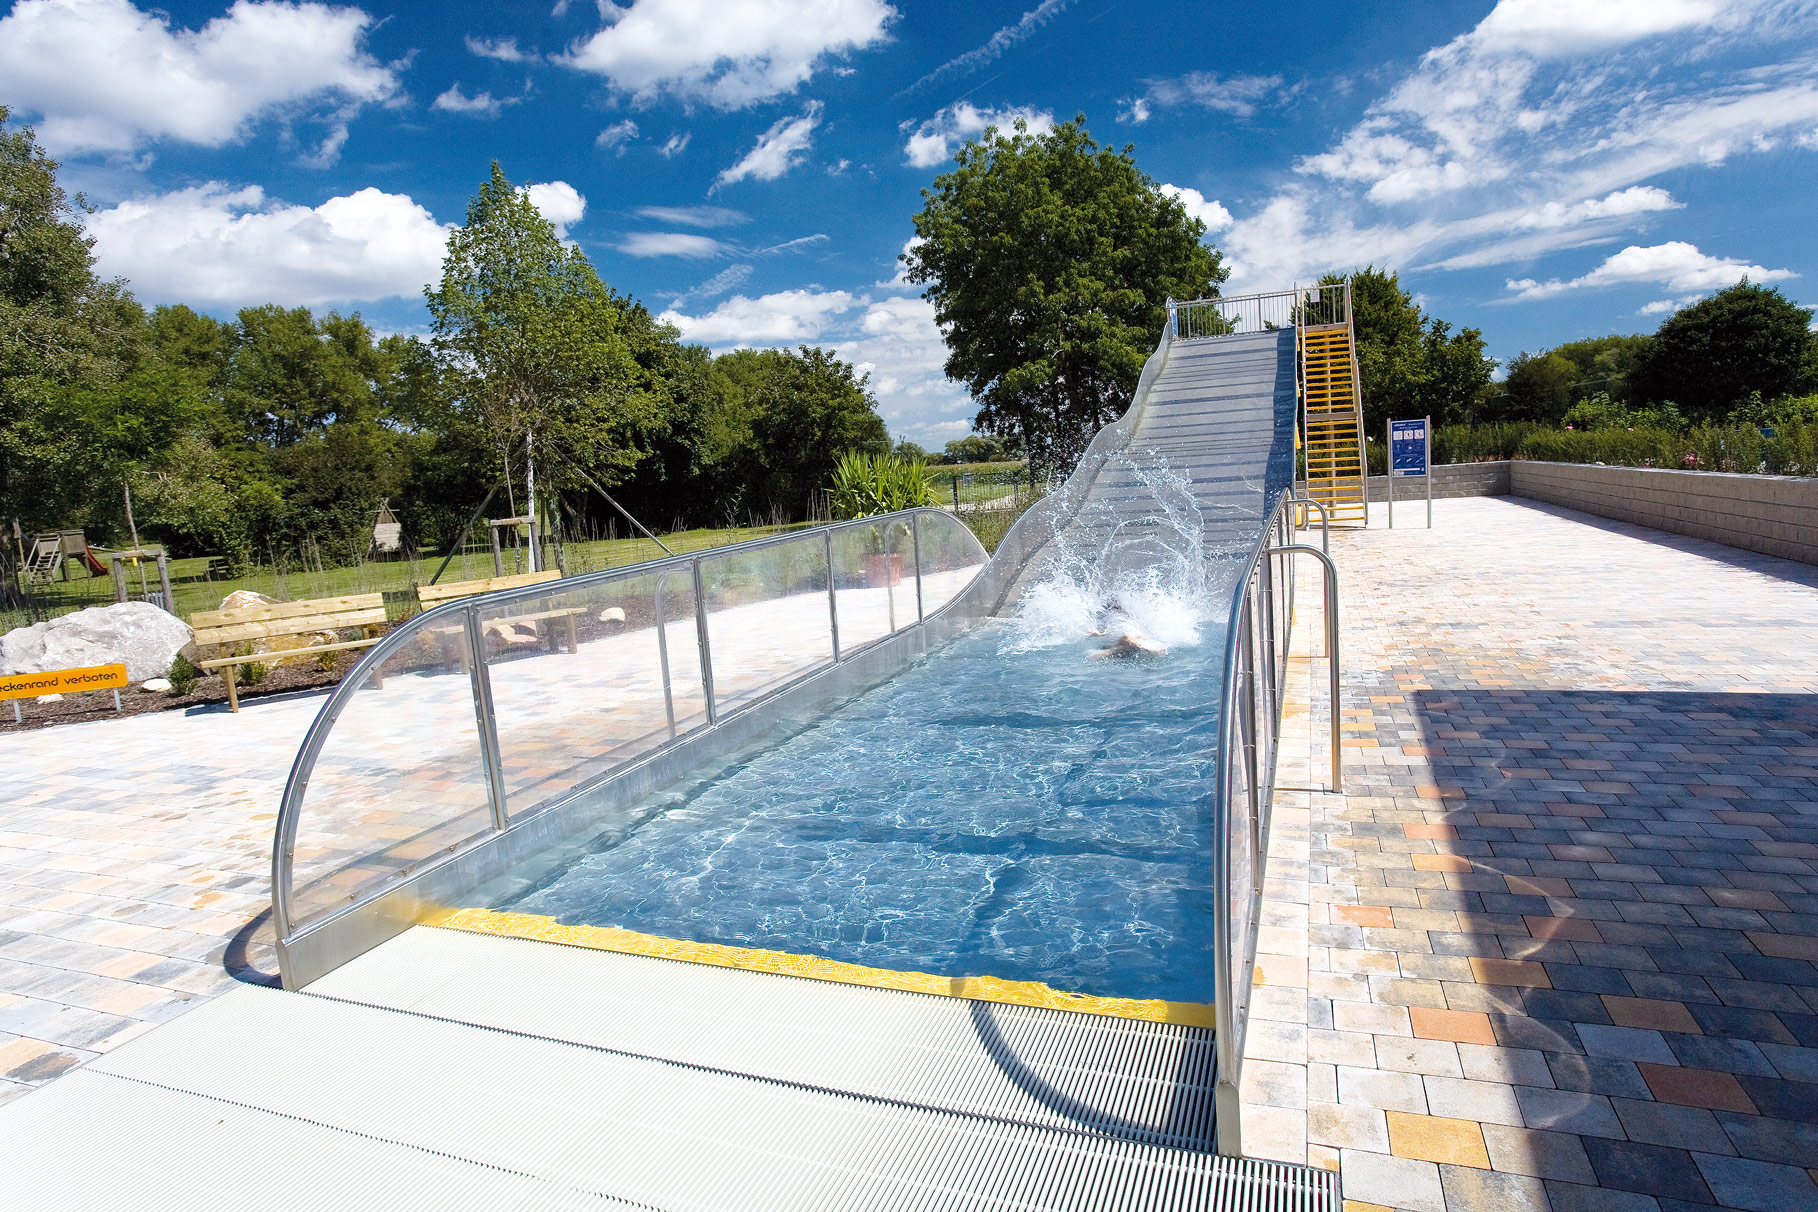 atlantics stainless steel slides open air swimming pool oaknvillage bayern wide waves boxwater 076468 Eichenvillage